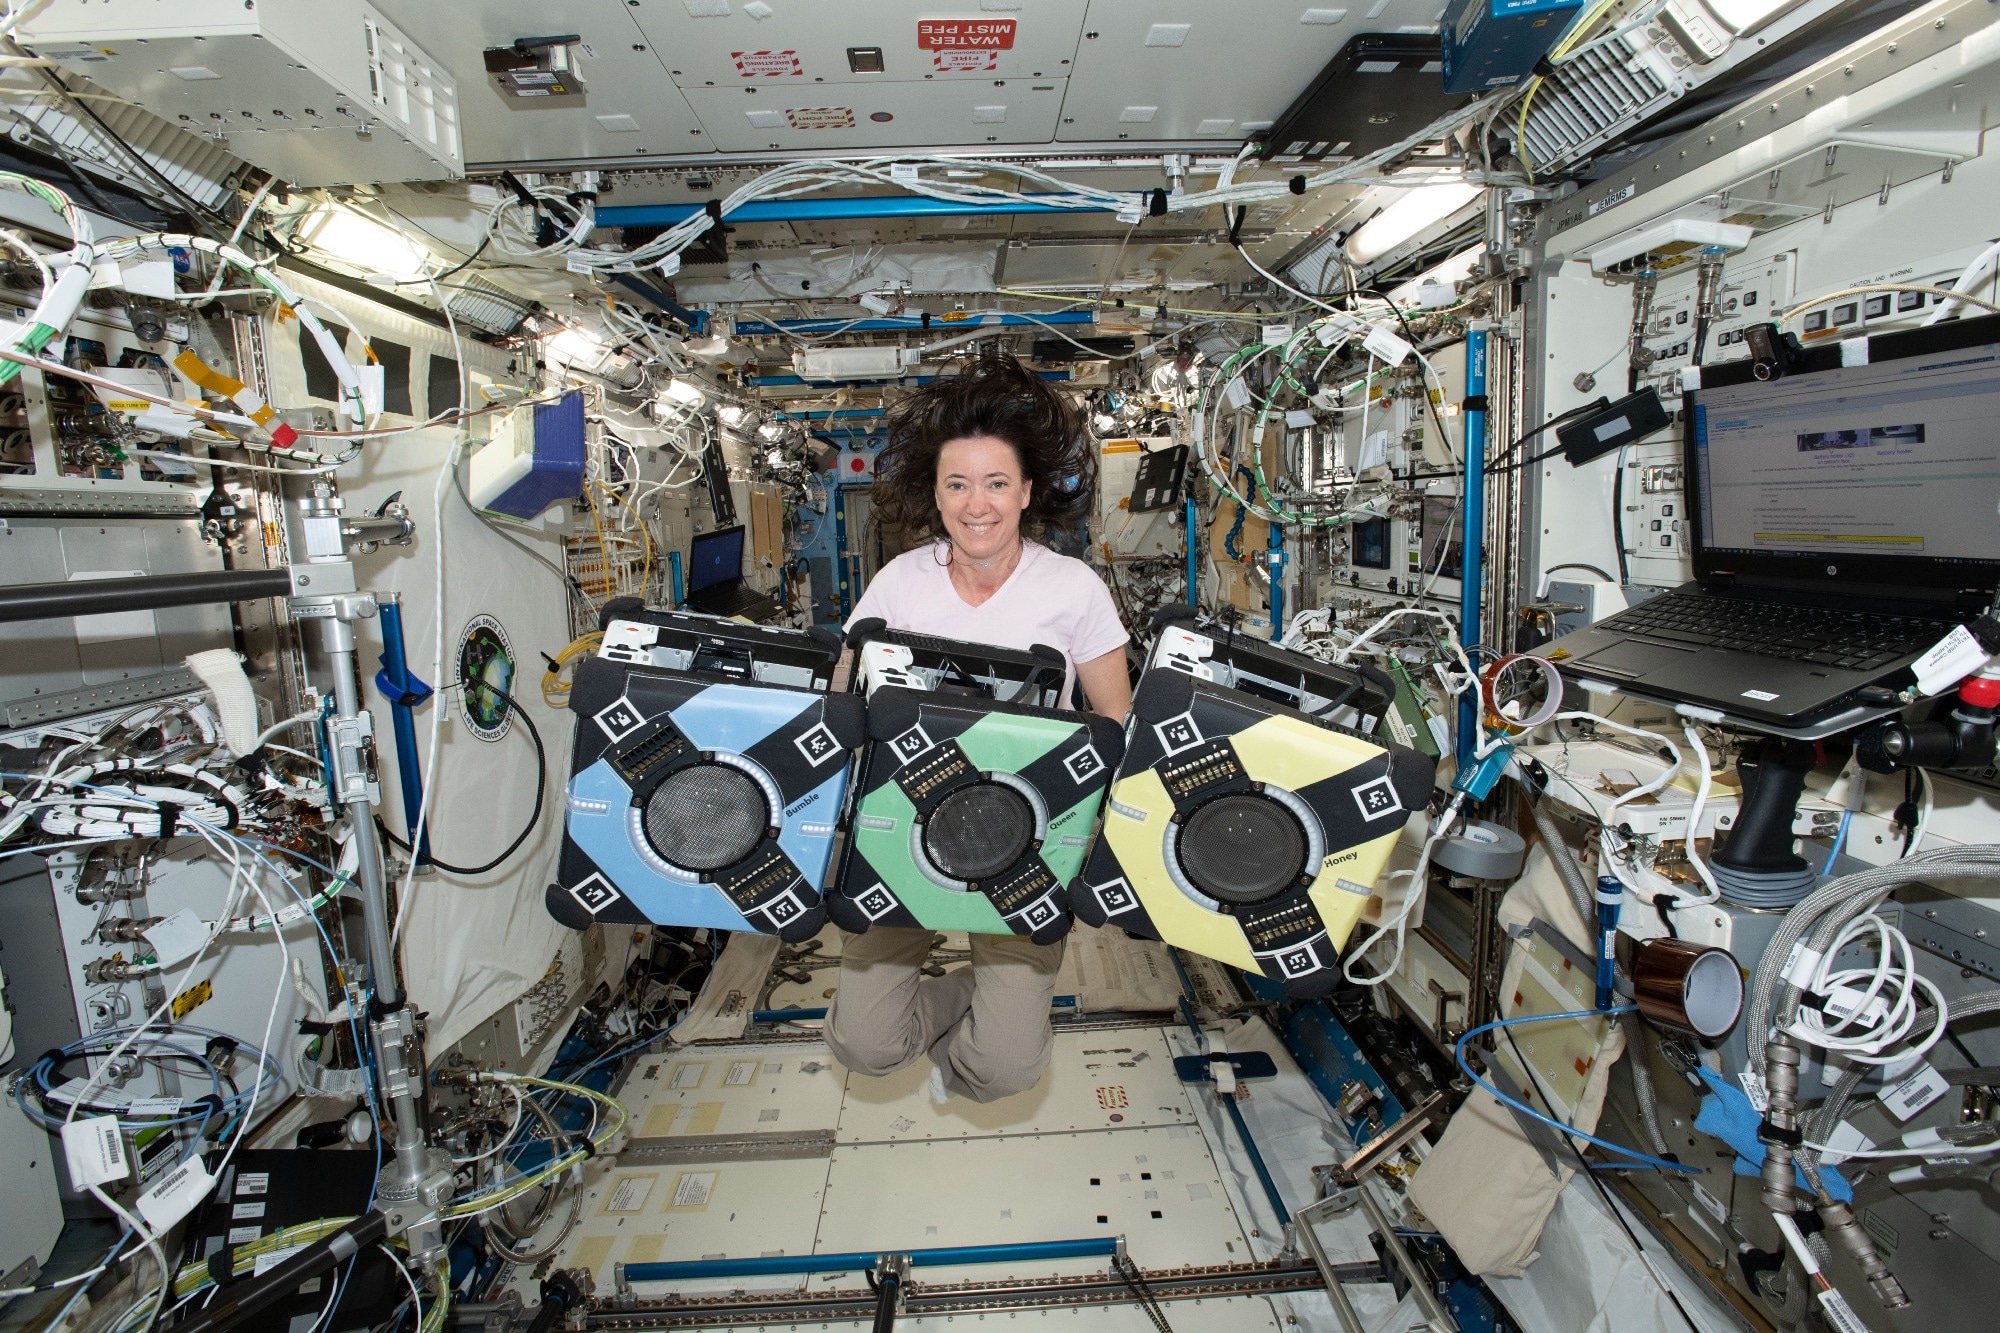 New Technology Being Tested by Robotic Helpers on Space Station